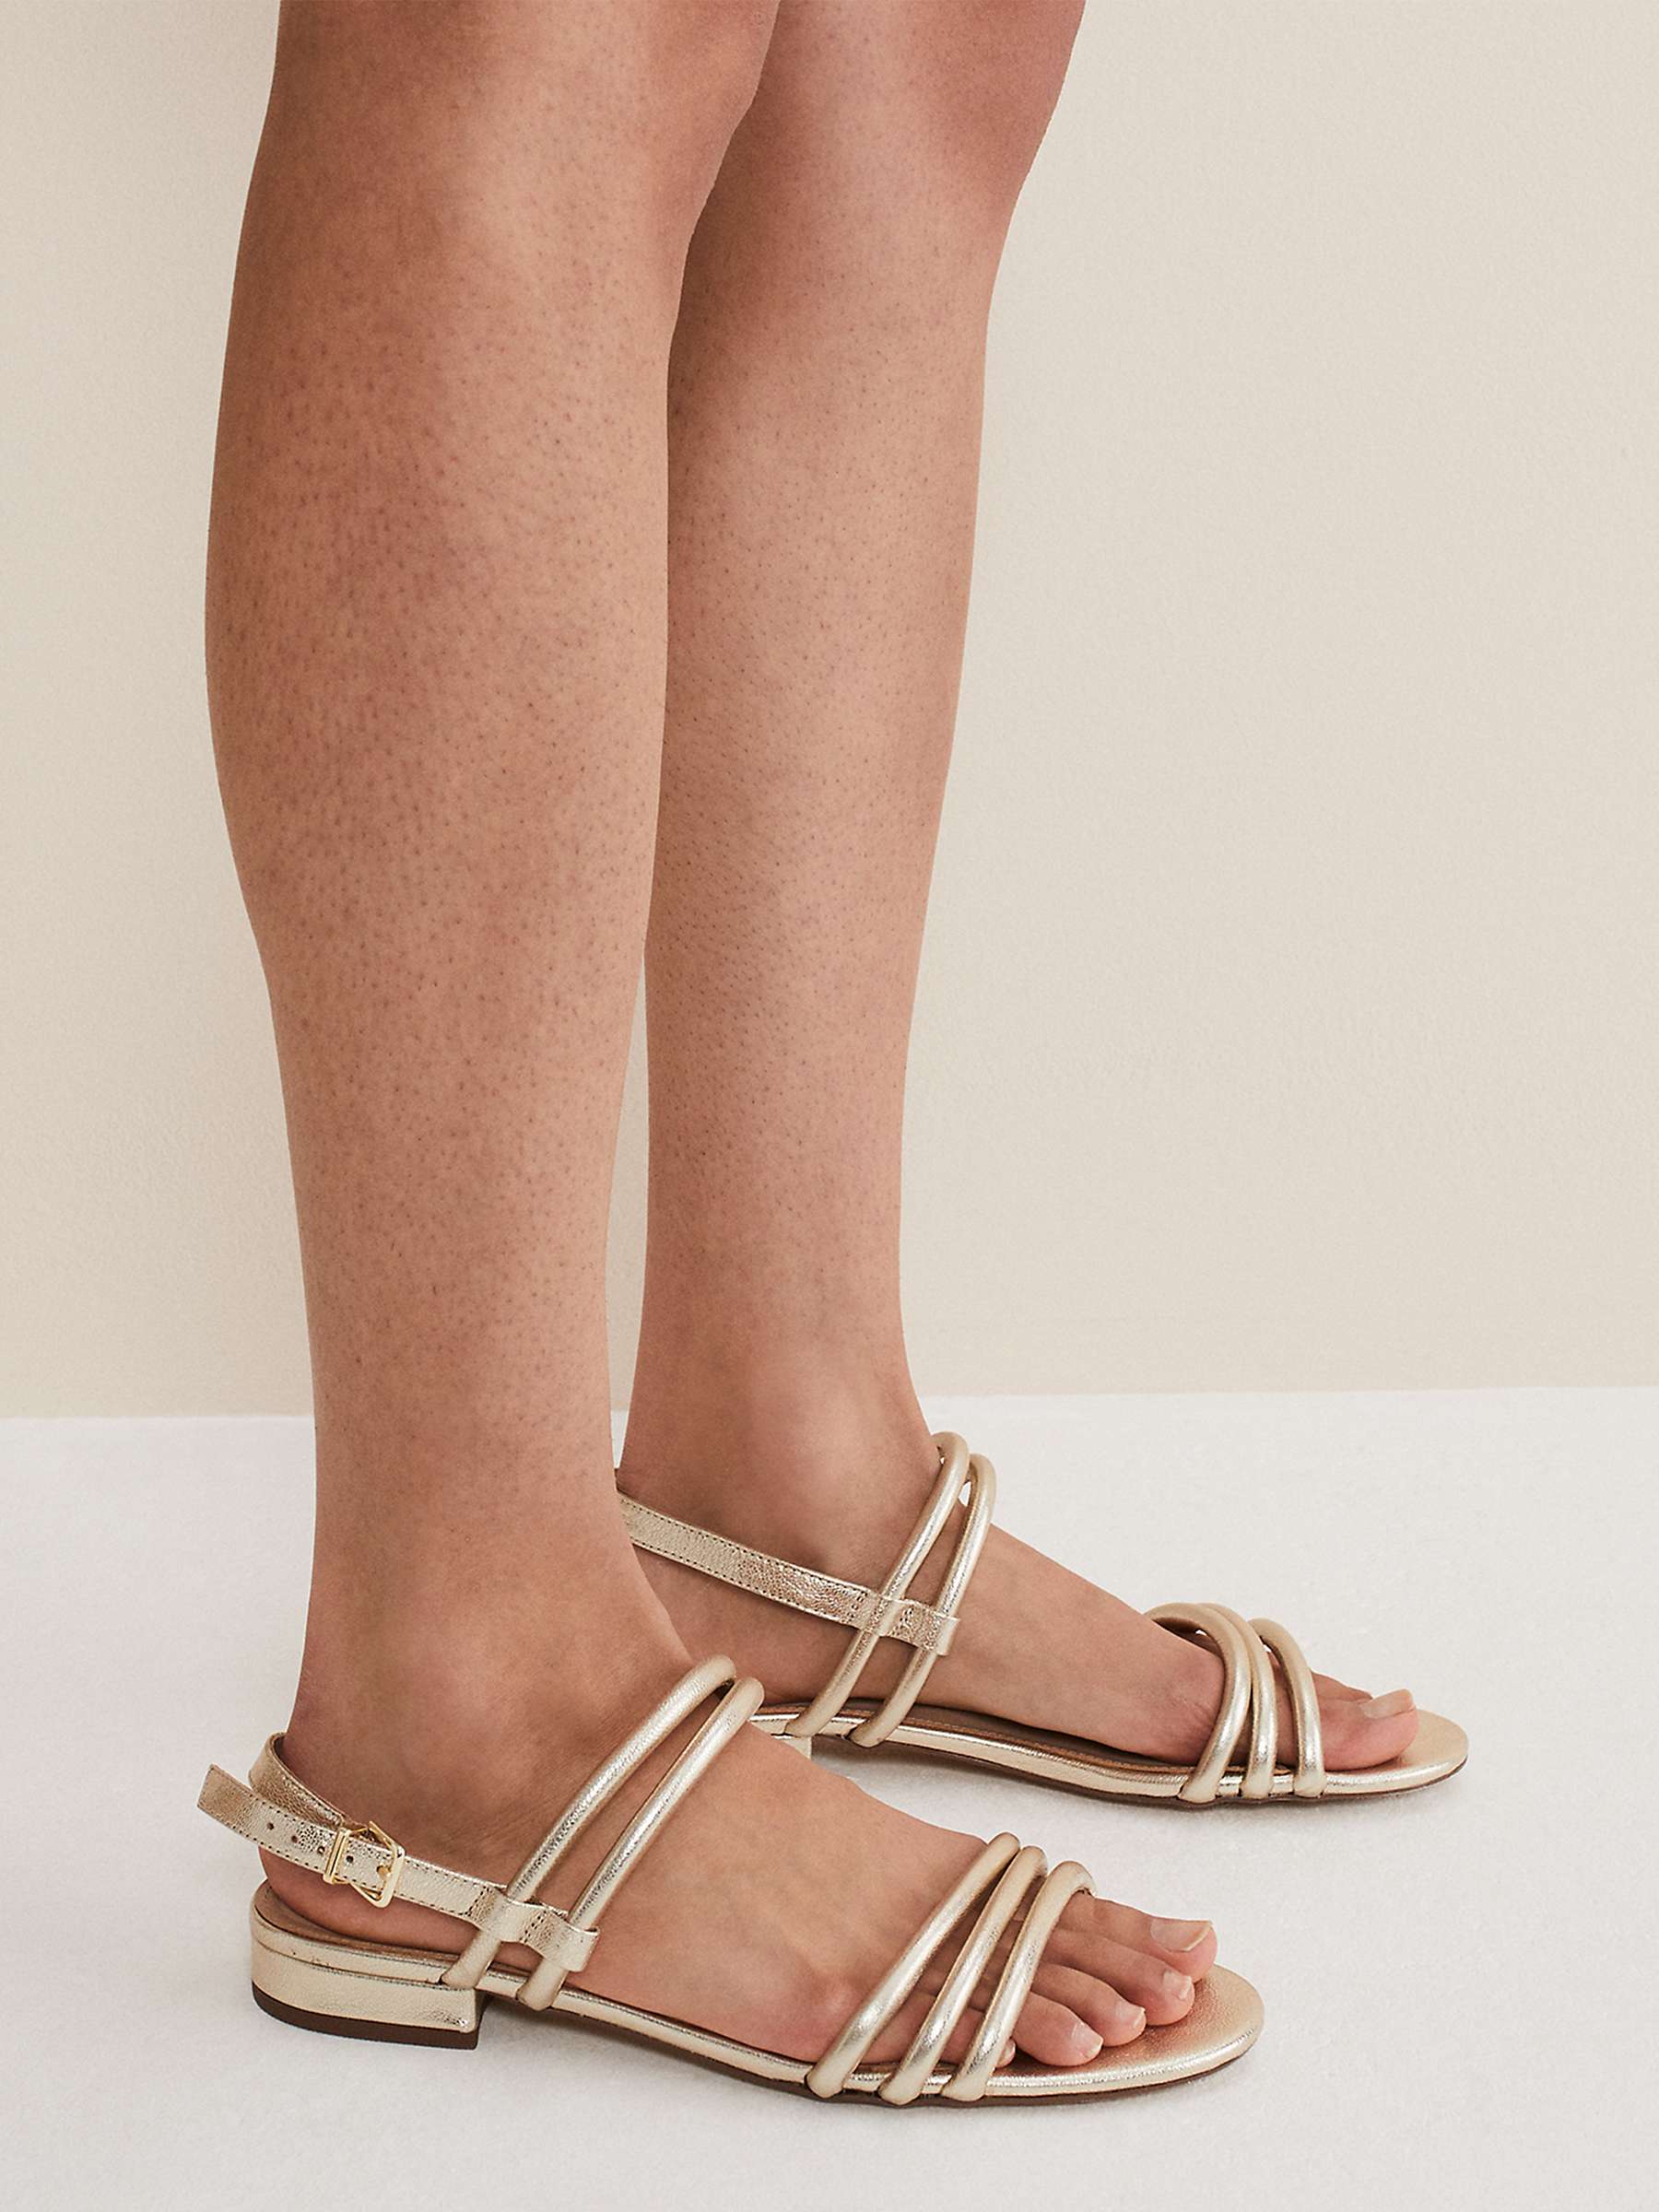 Buy Phase Eight Metallic Leather Sandals, Gold Online at johnlewis.com